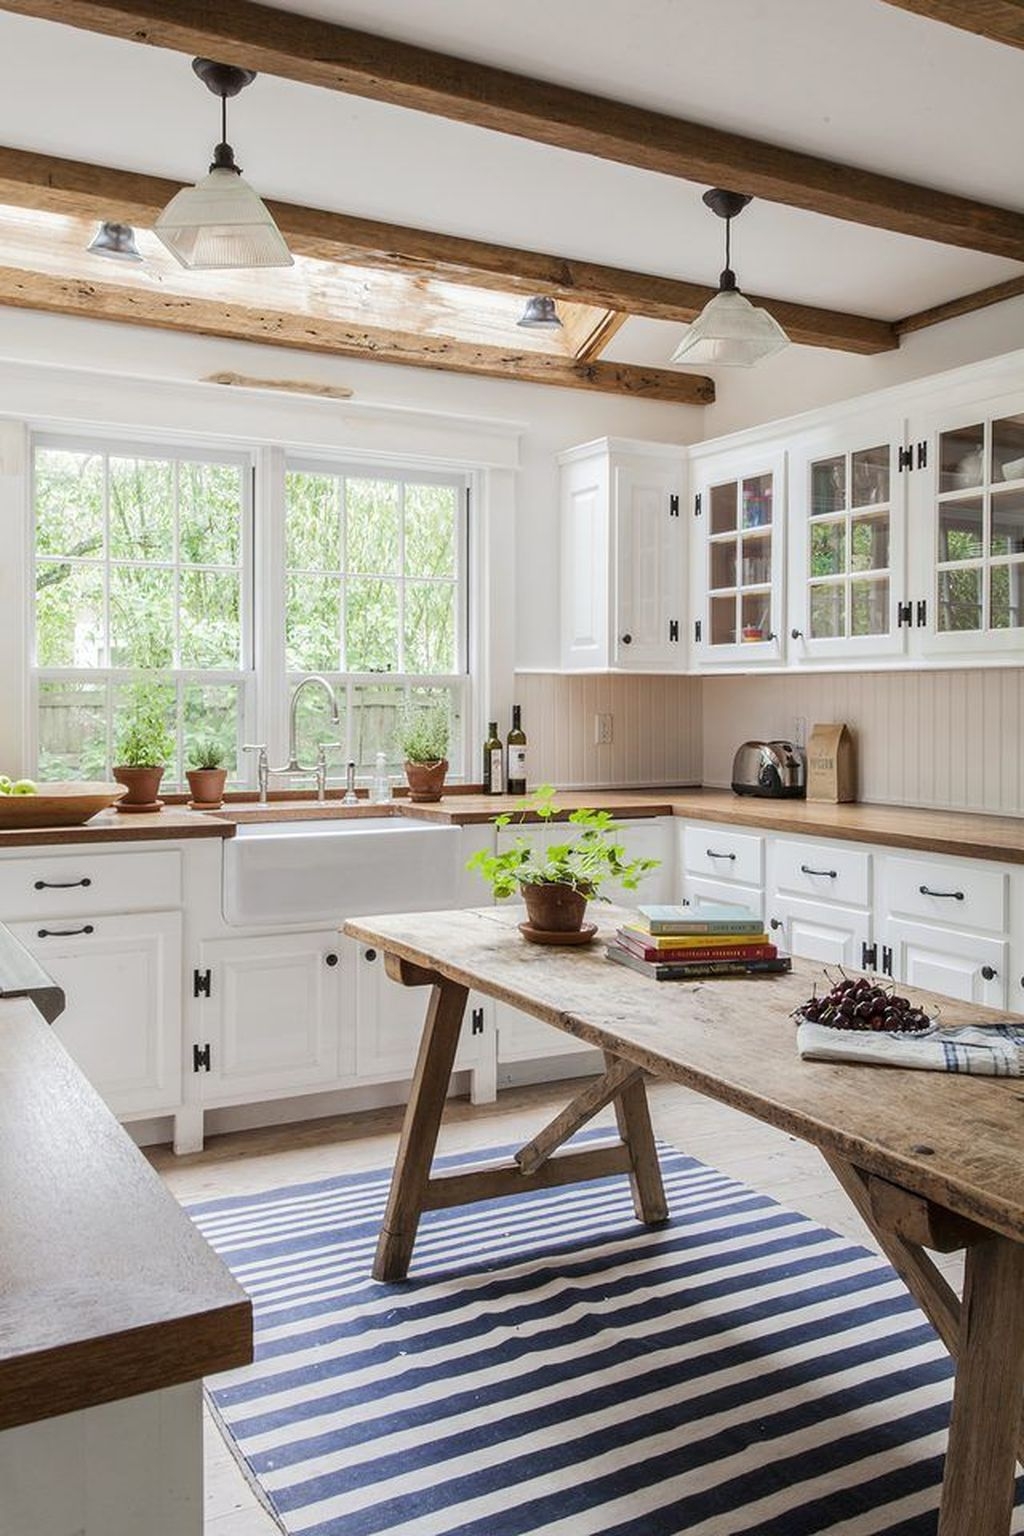 Rustic Farmhouse Kitchen Ideas To Get Traditional Accent 46